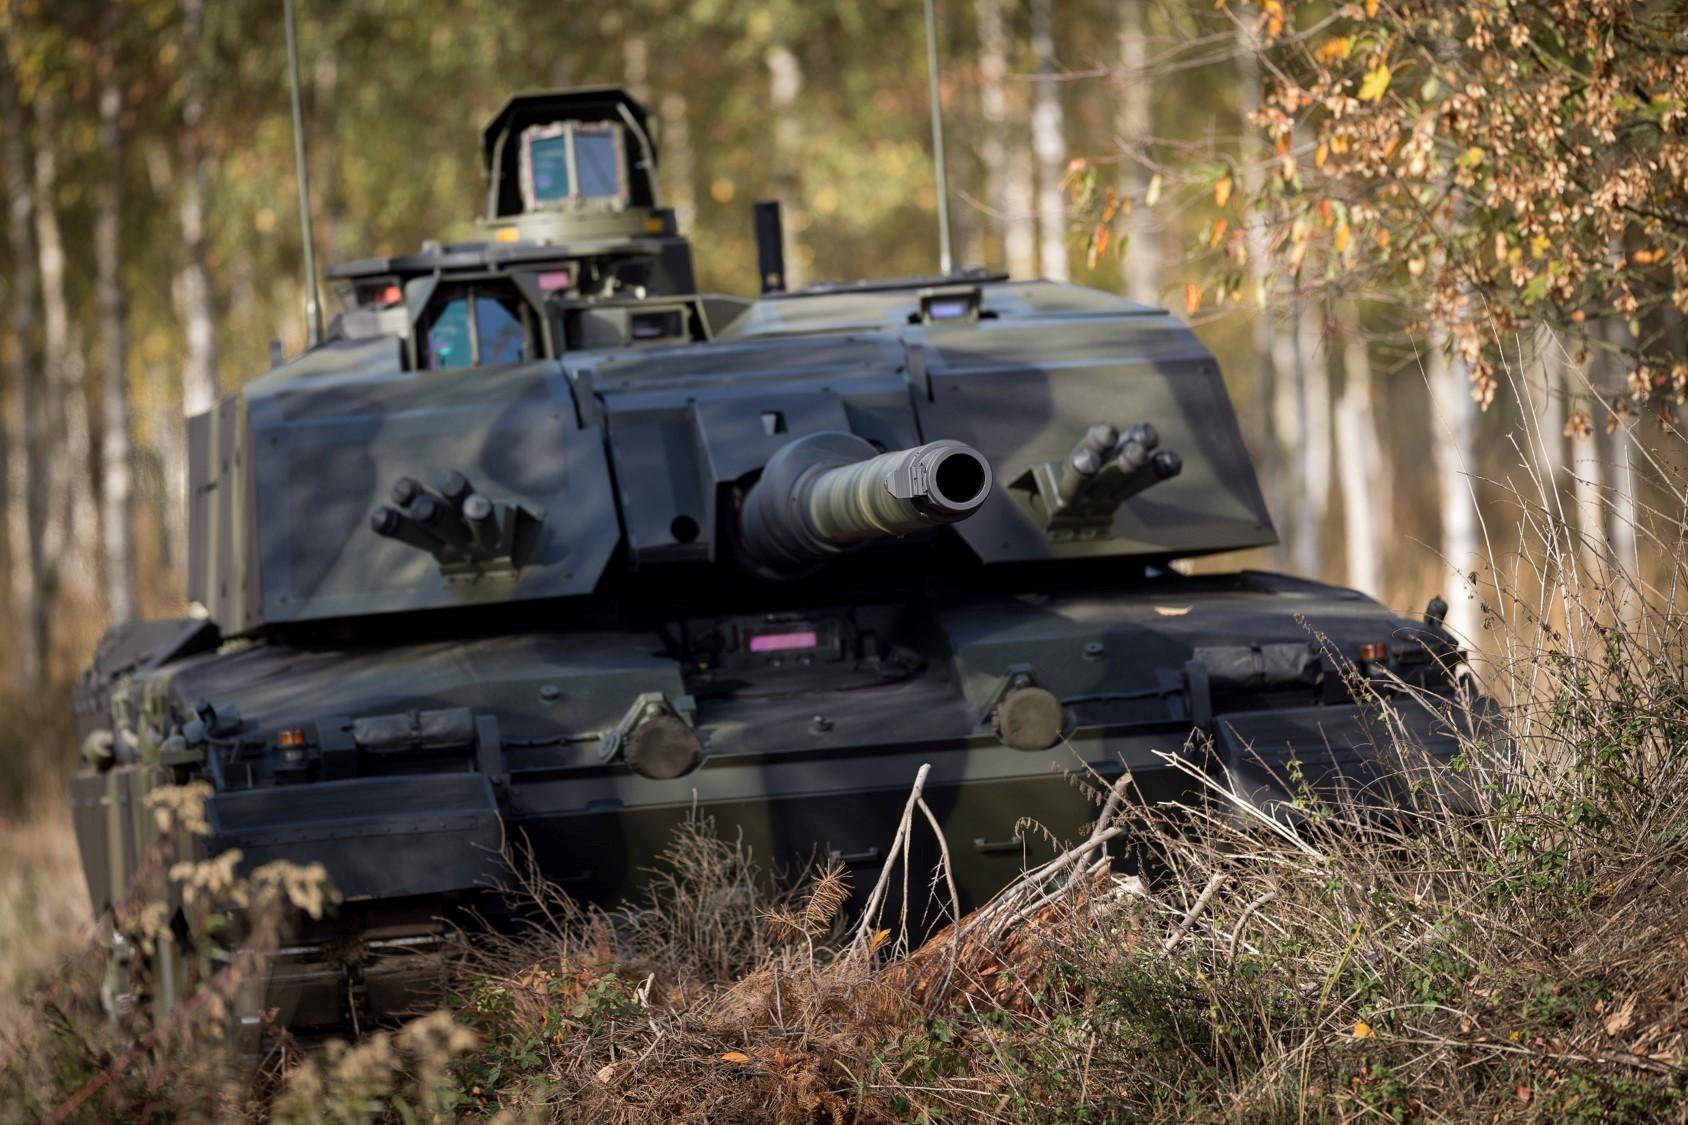 RBSL Awards £90 Million to Thales UK for Sighting Systems on Challenger 3 Main Battle Tank